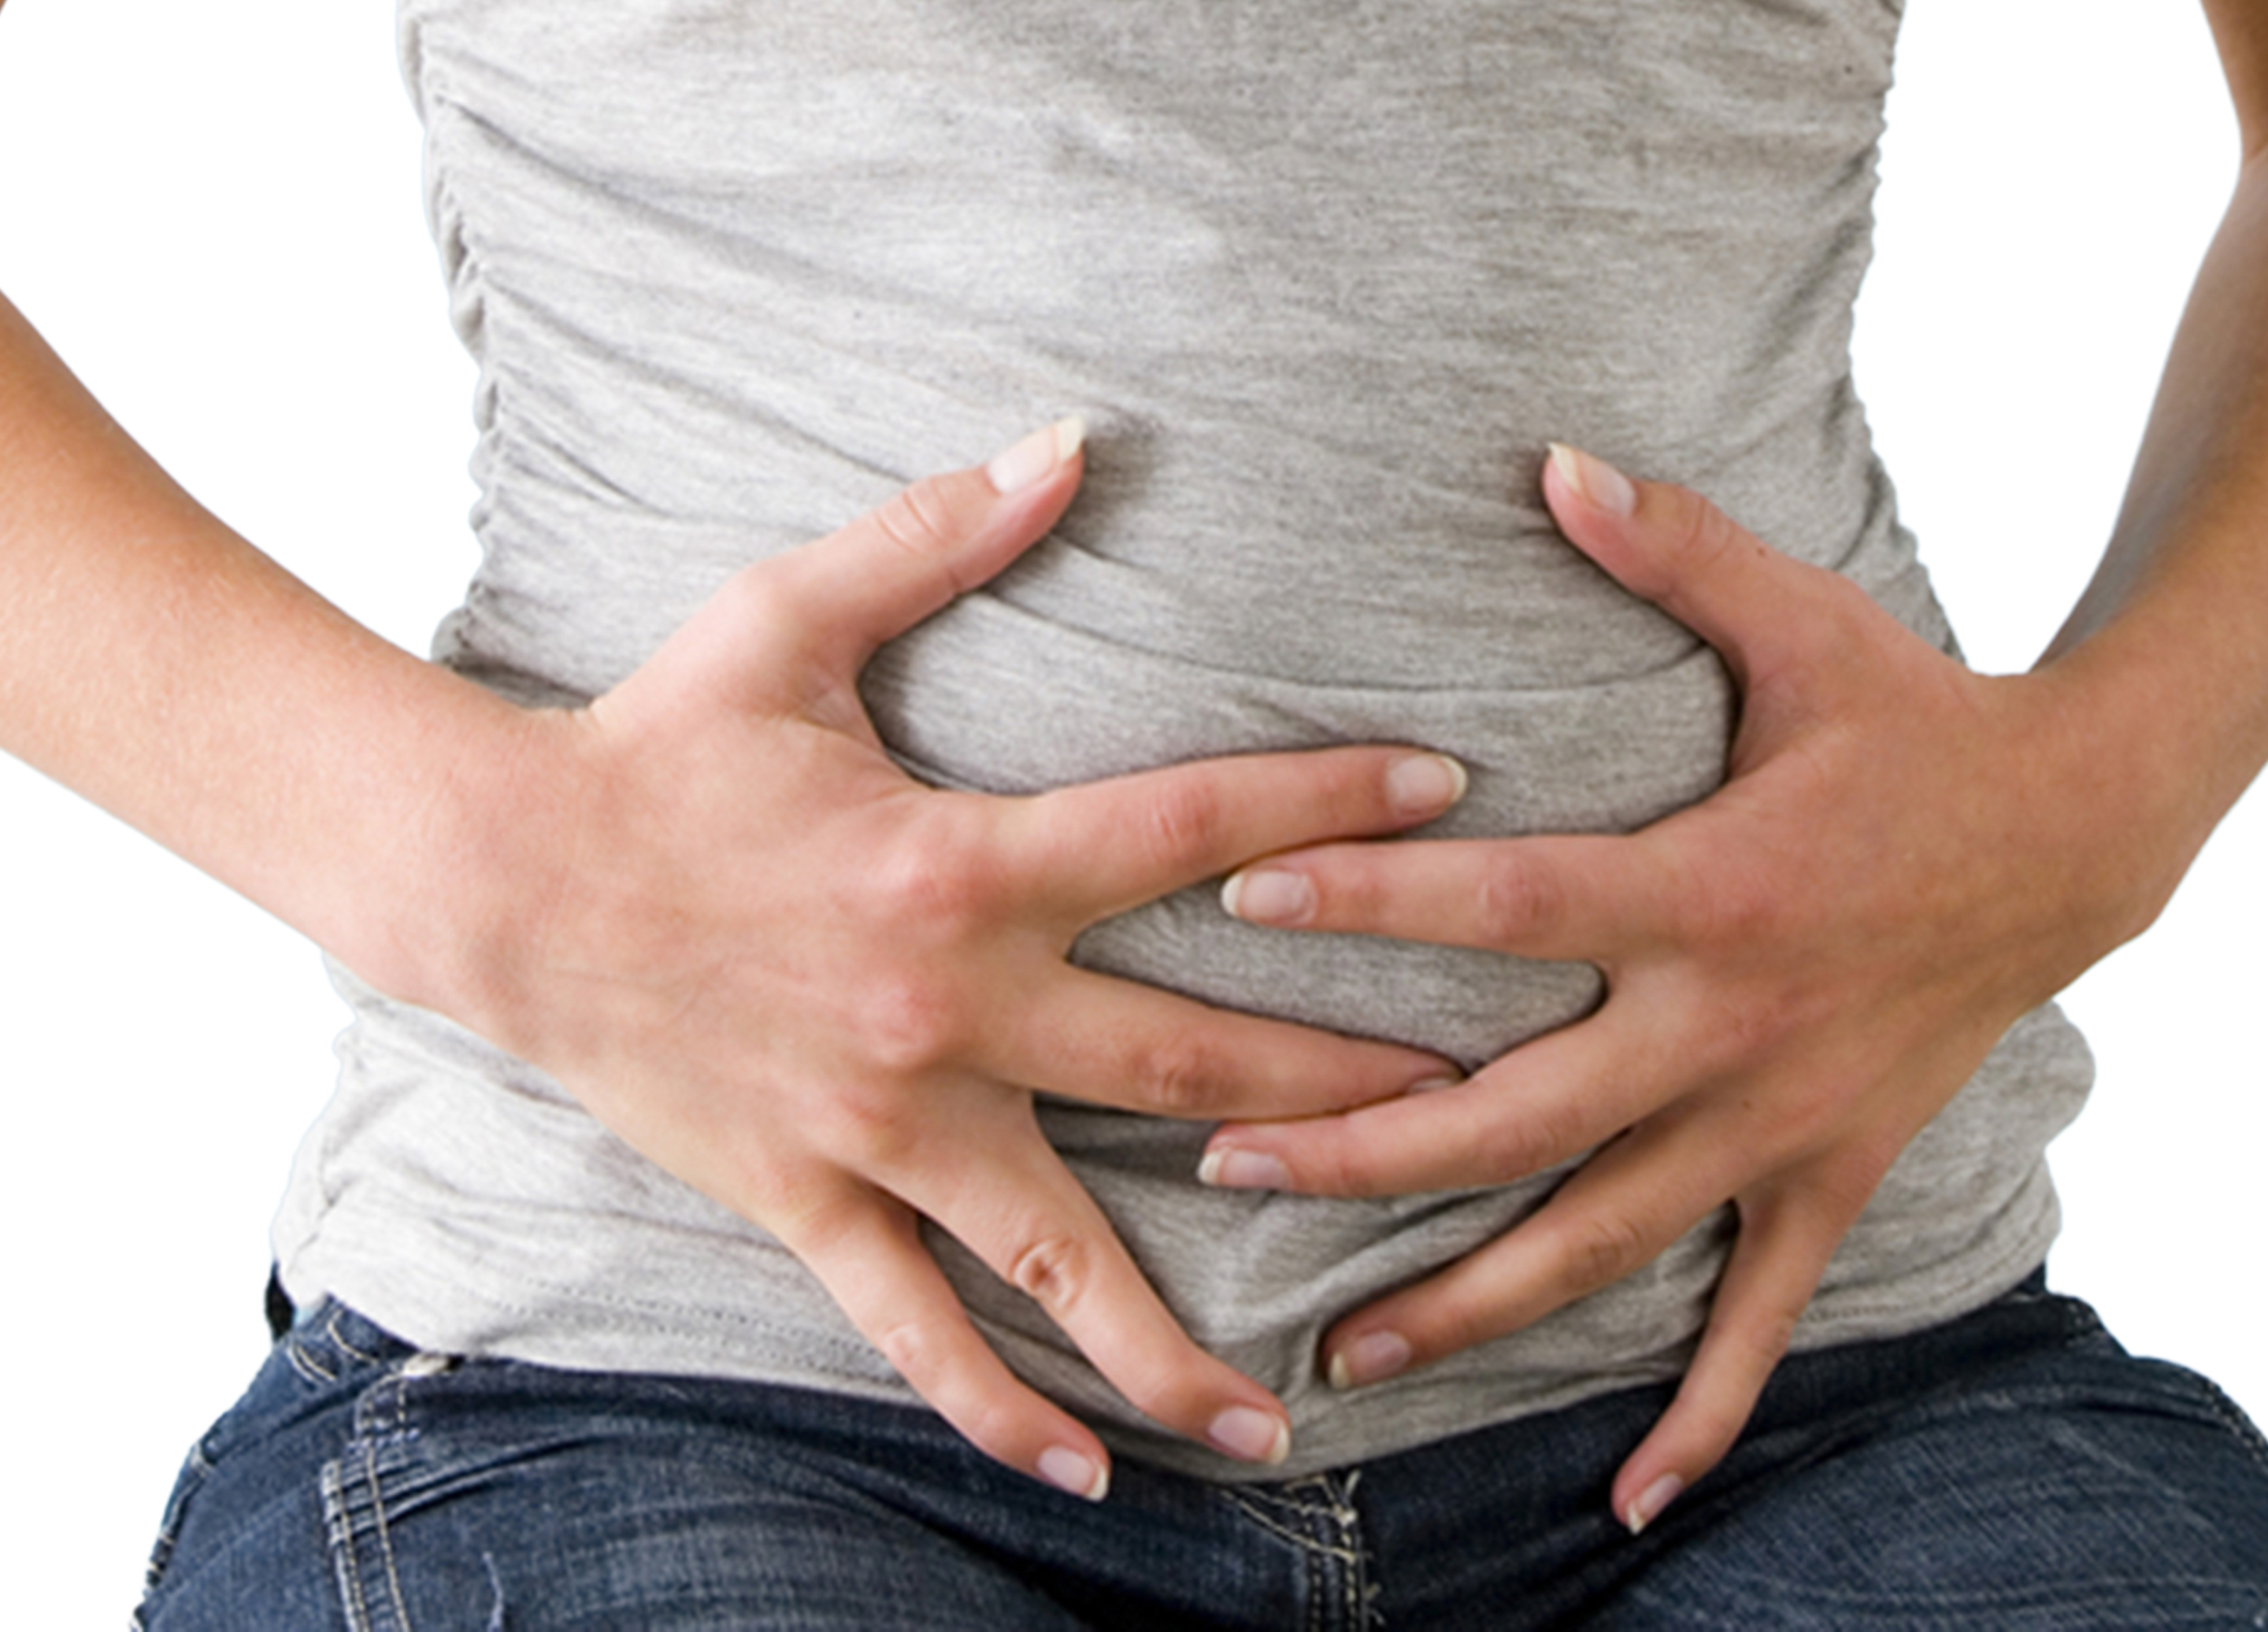 Do prebiotics cause gas and bloating?